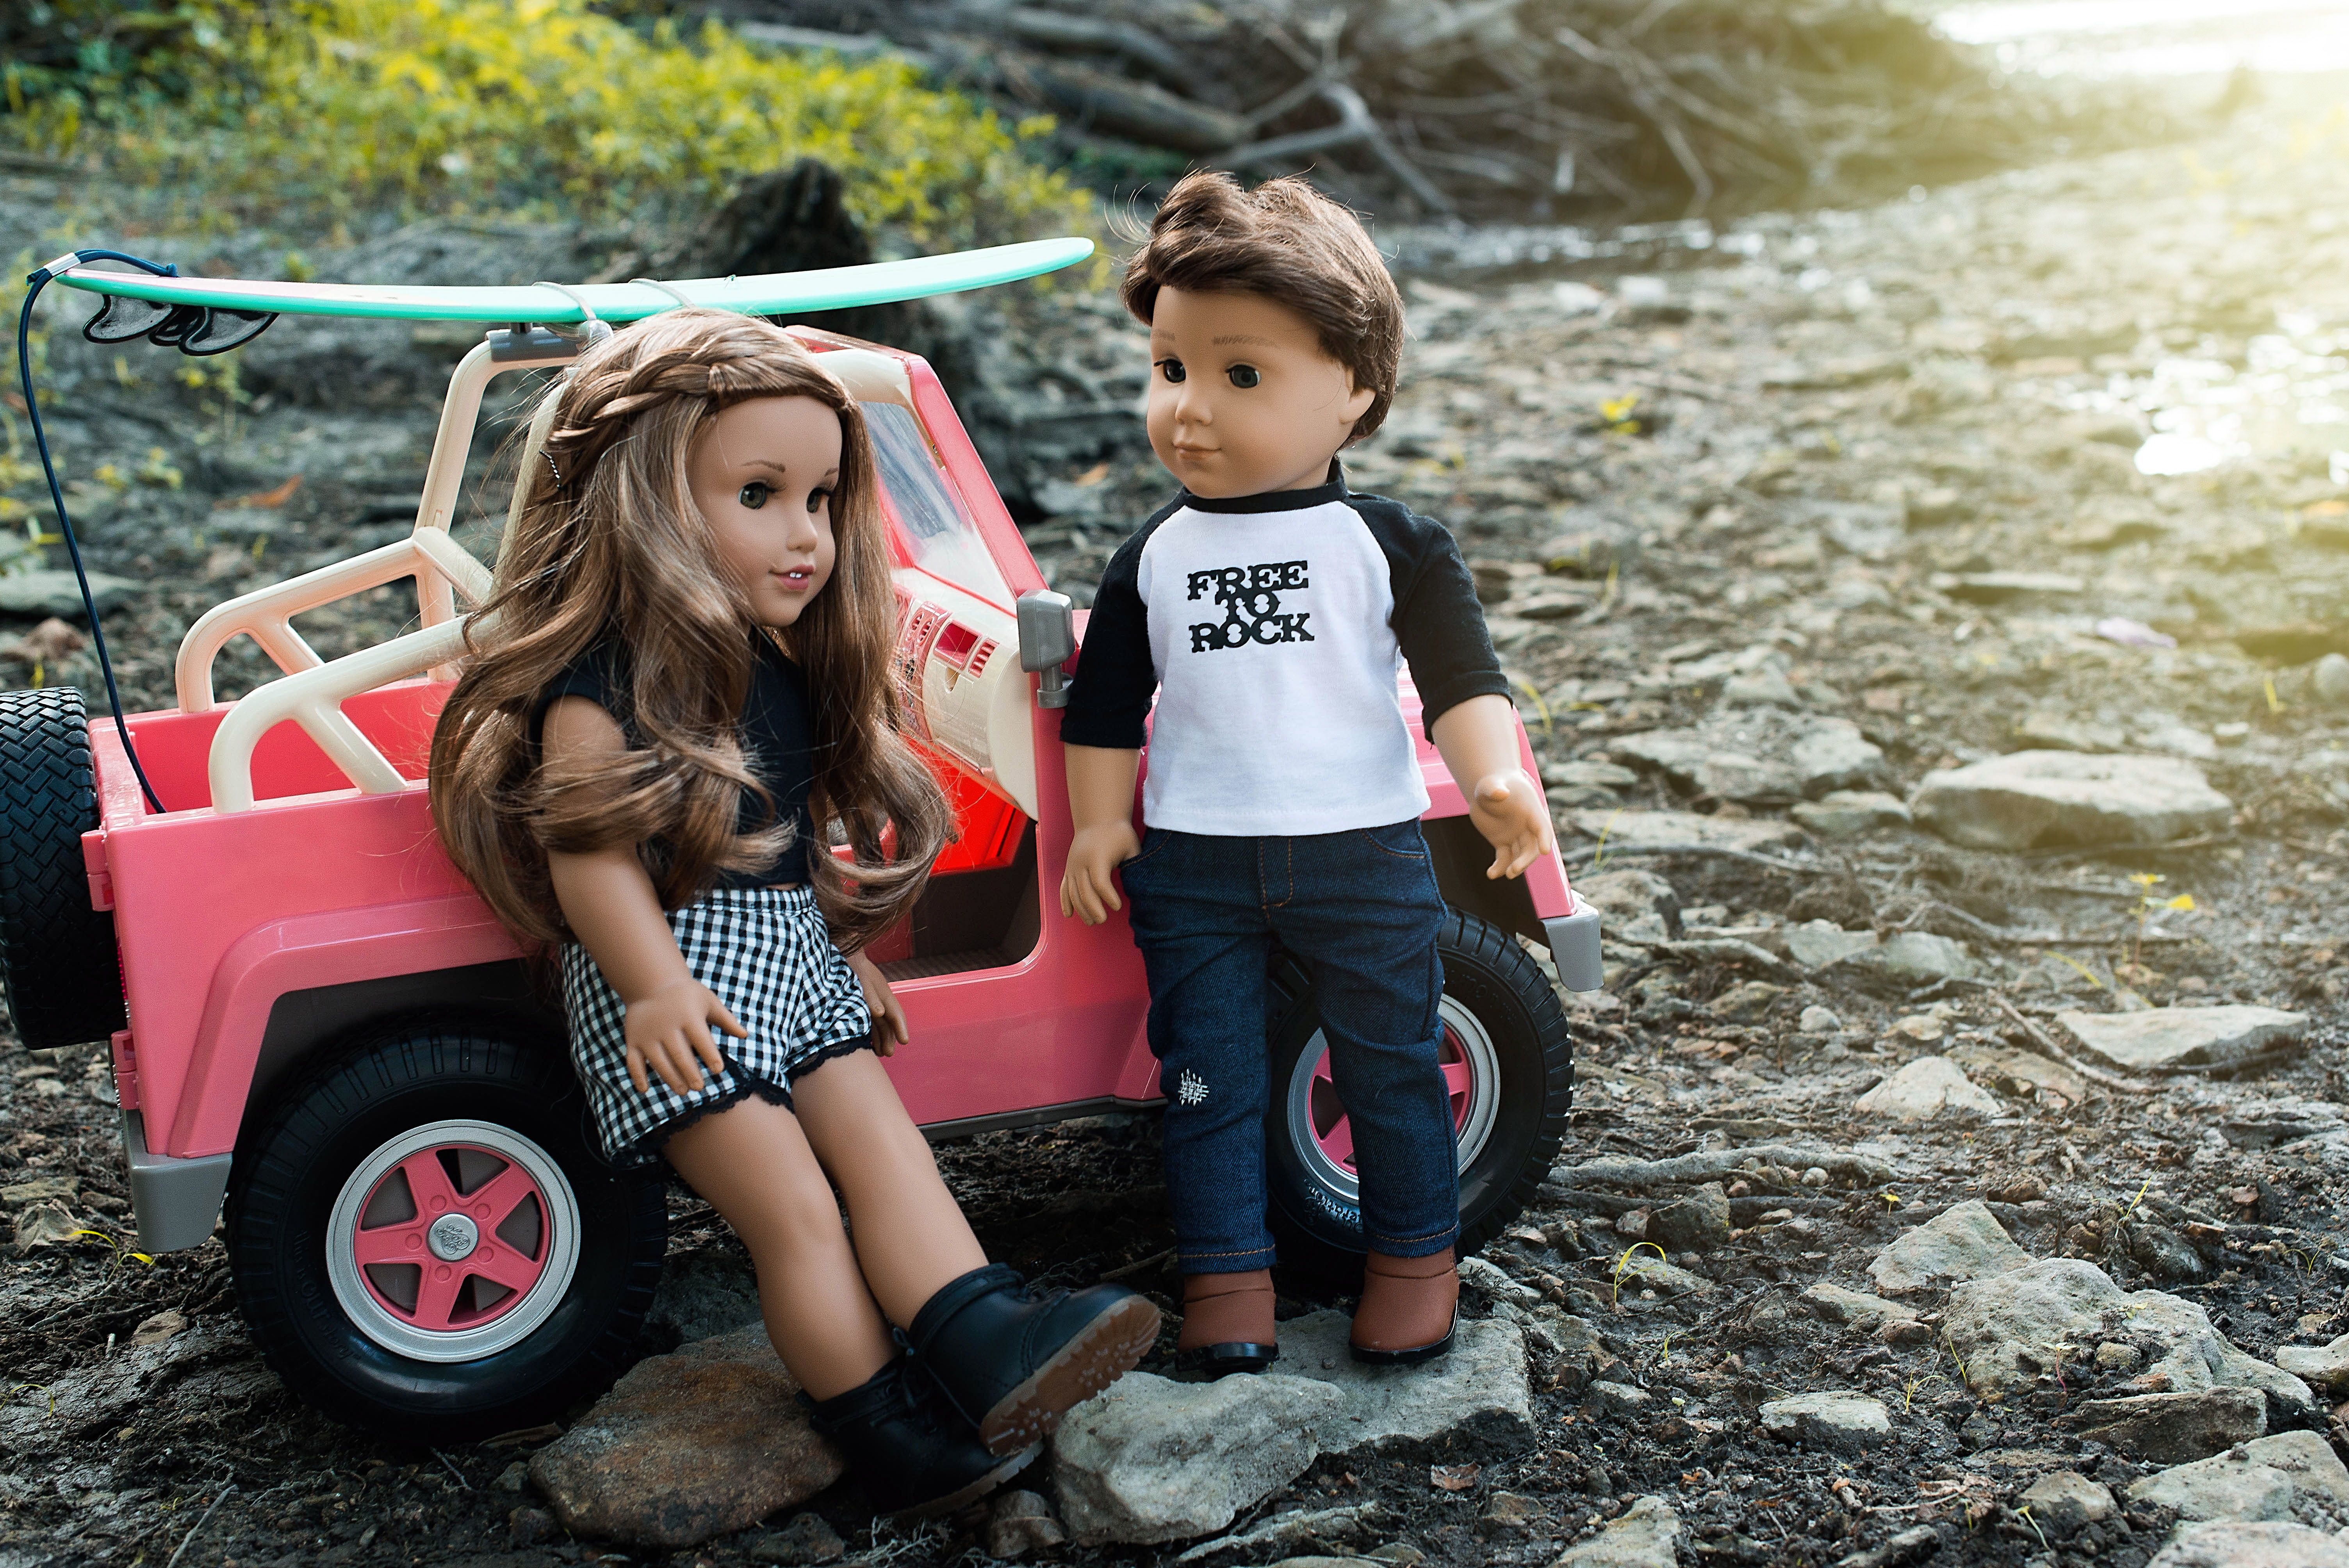 Cute Doll Photo Of Lea And Logan 18incHDollphotography